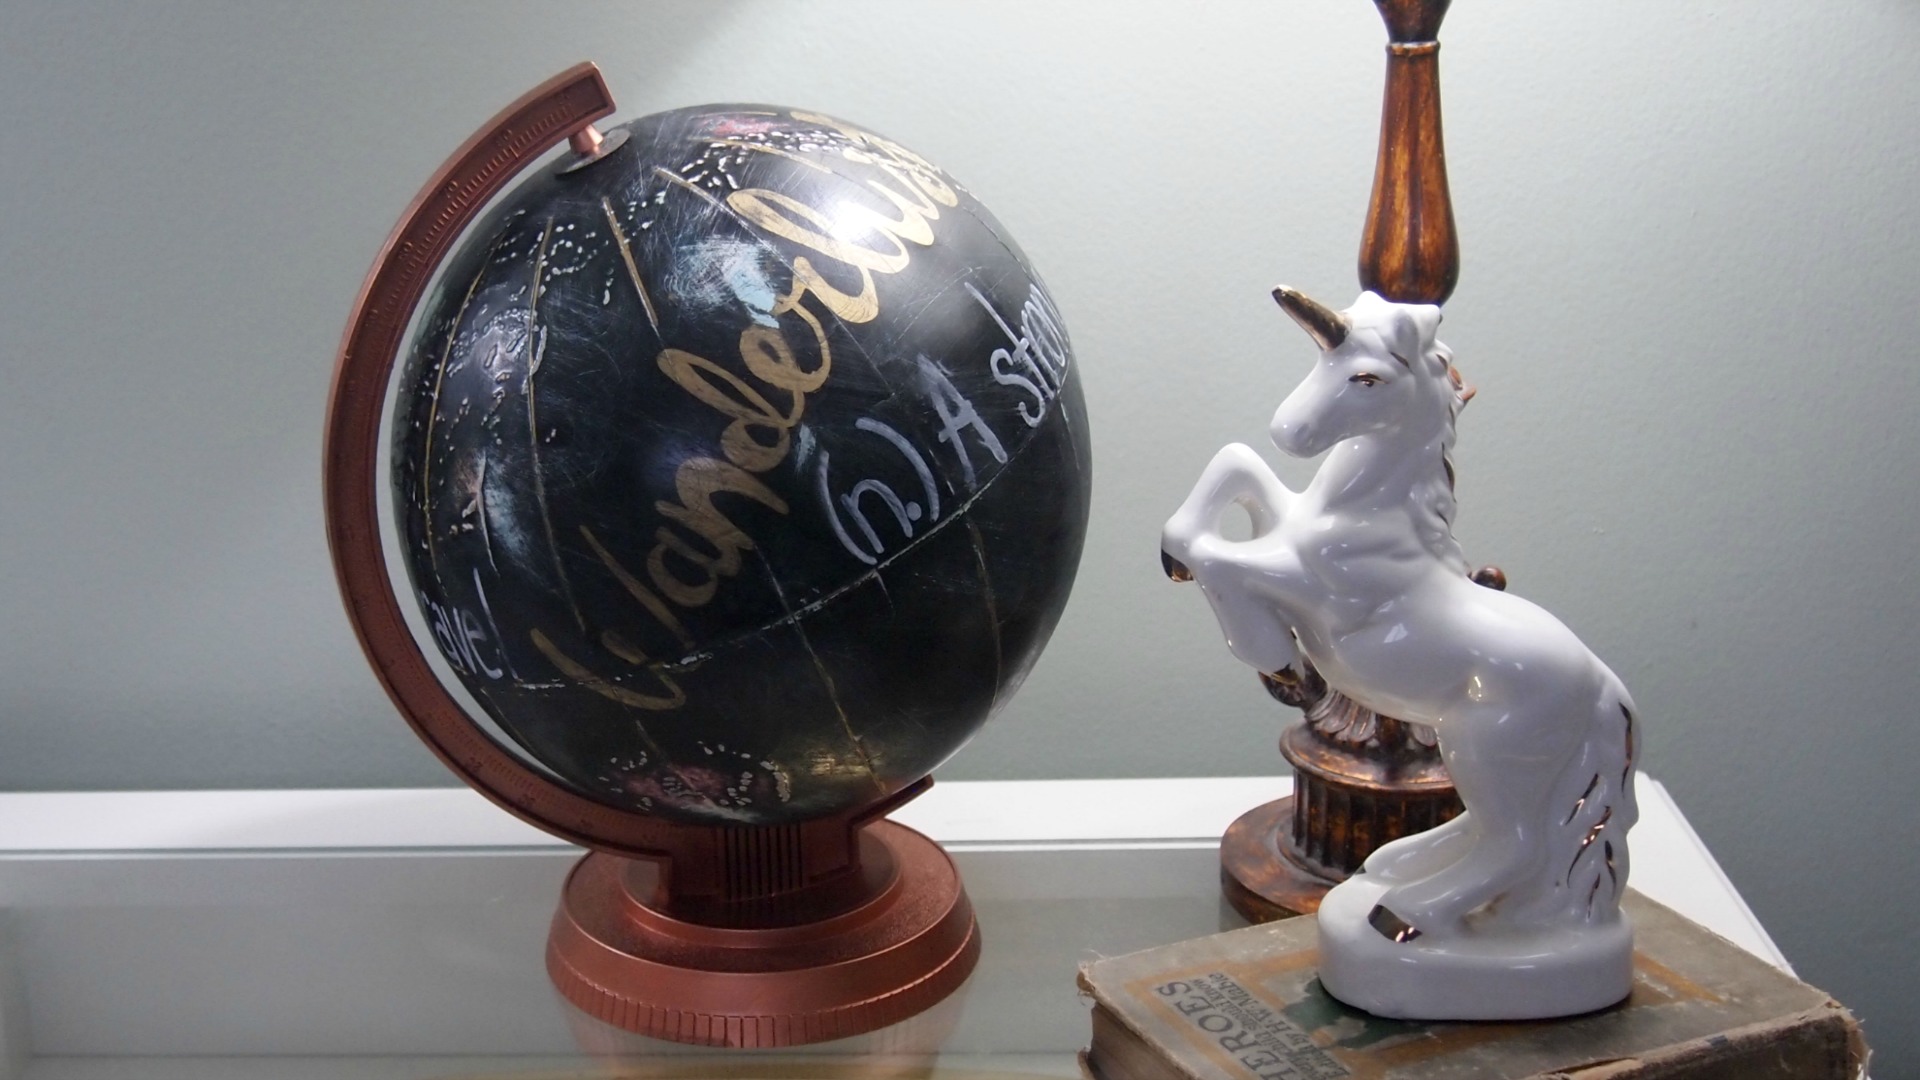 Painted Globe with metallic and chalkboard beauty